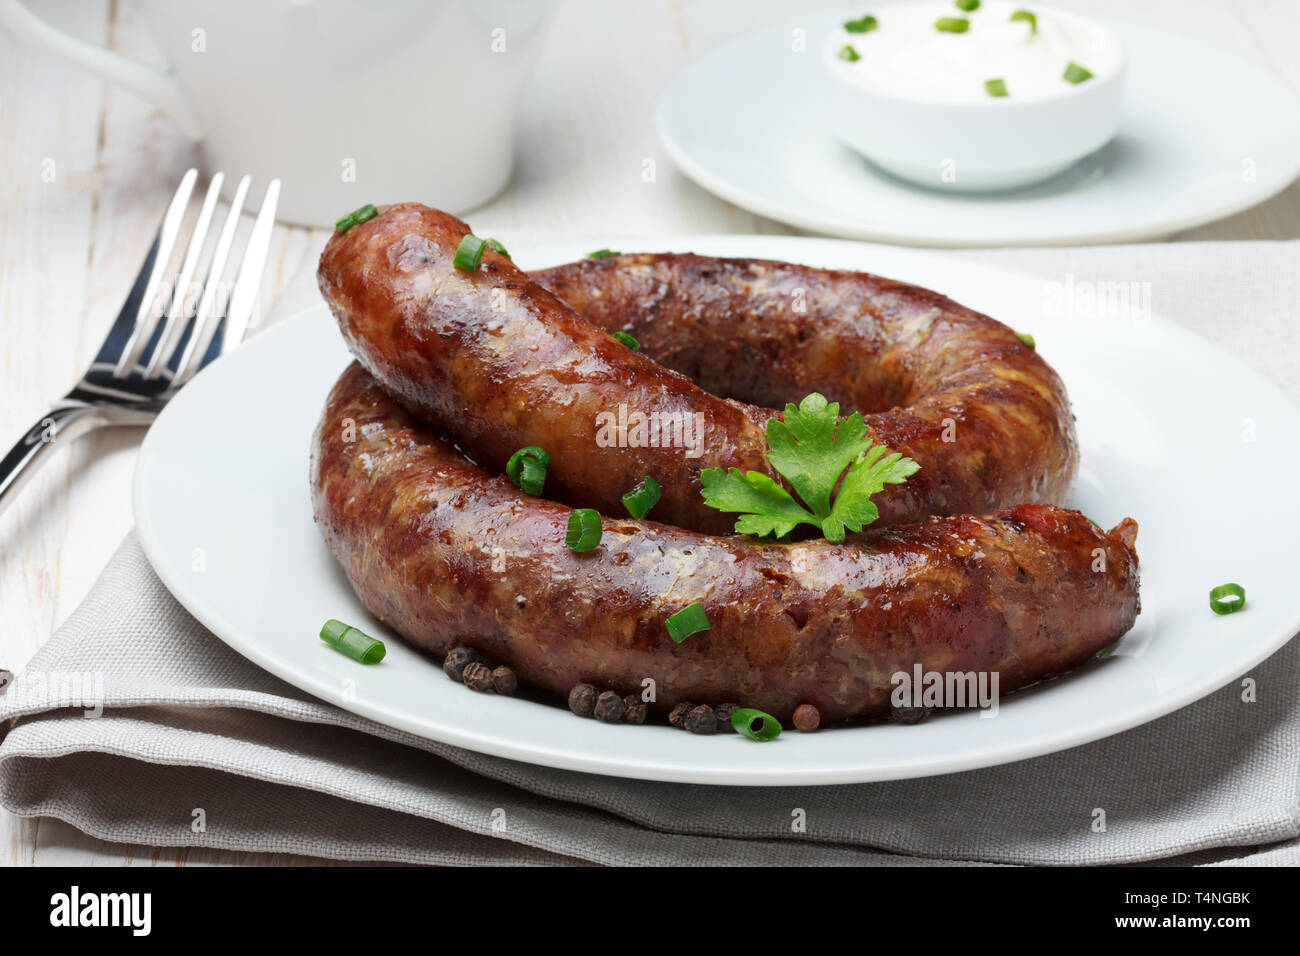 Traditional homemade coiled sausage on wooden table Stock Photo